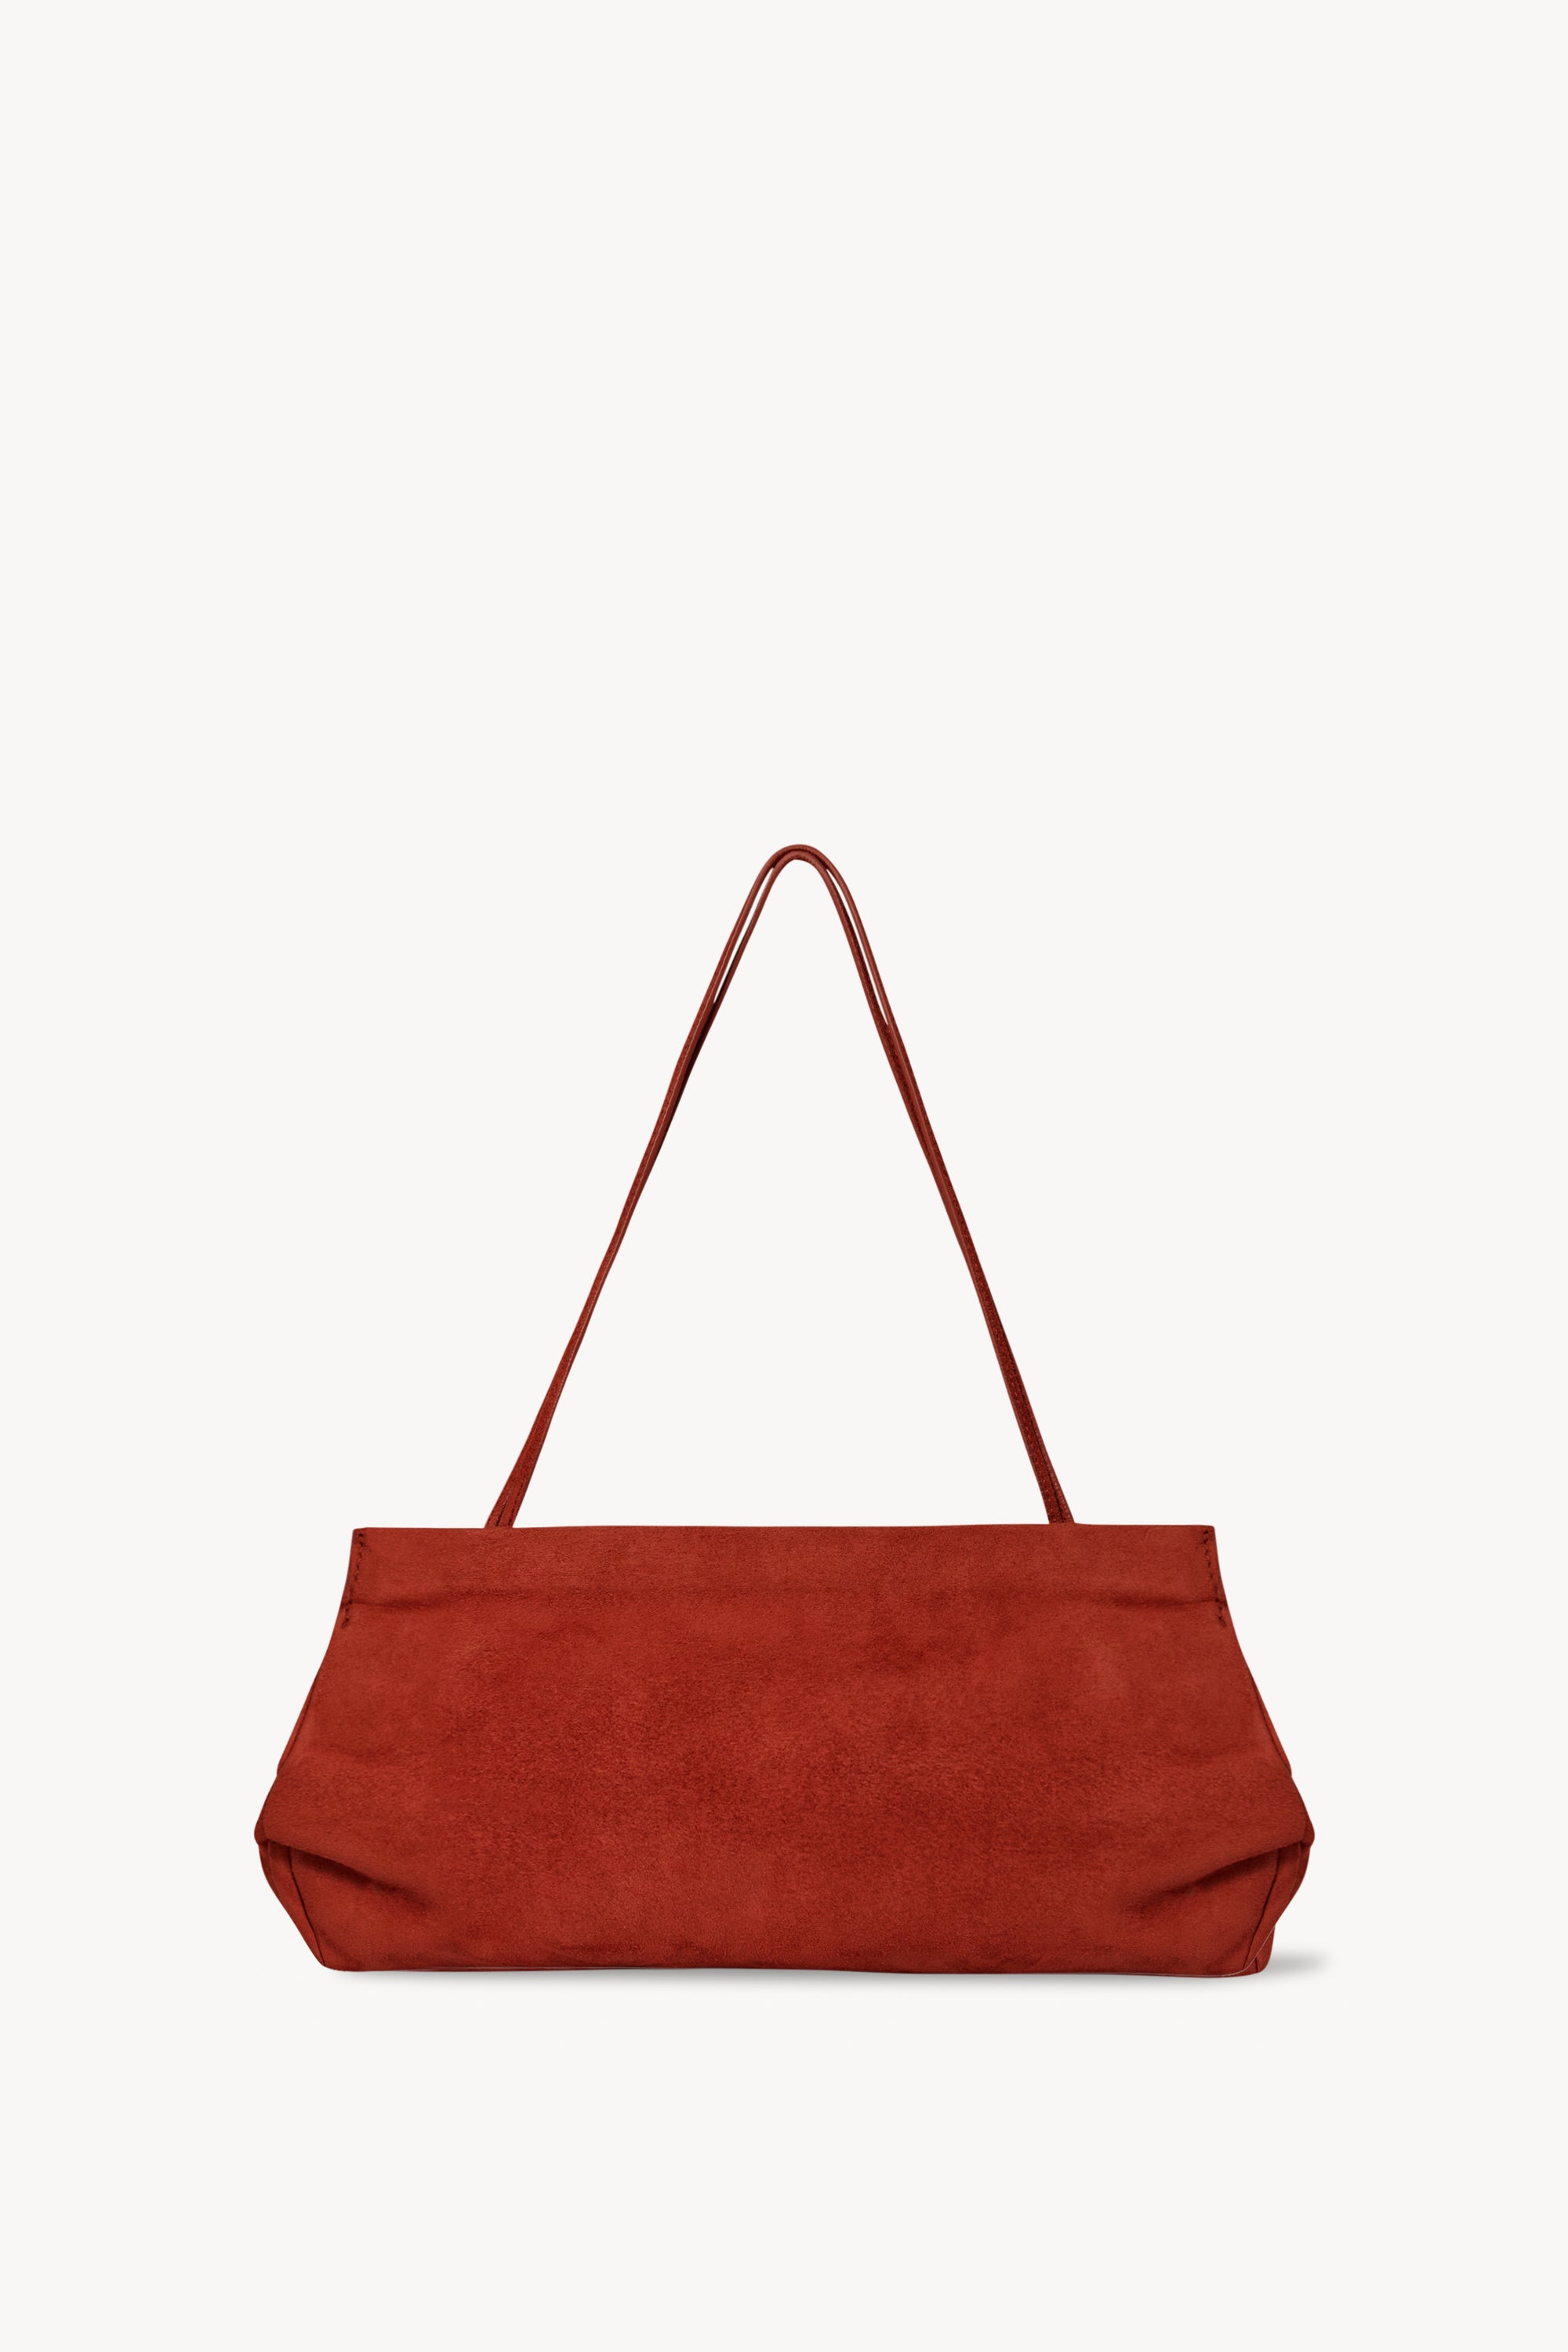 ZARA NEW COLLECTION BAGS & SHOES MAY 2021 / SPRING SUMMER COLLECTION 